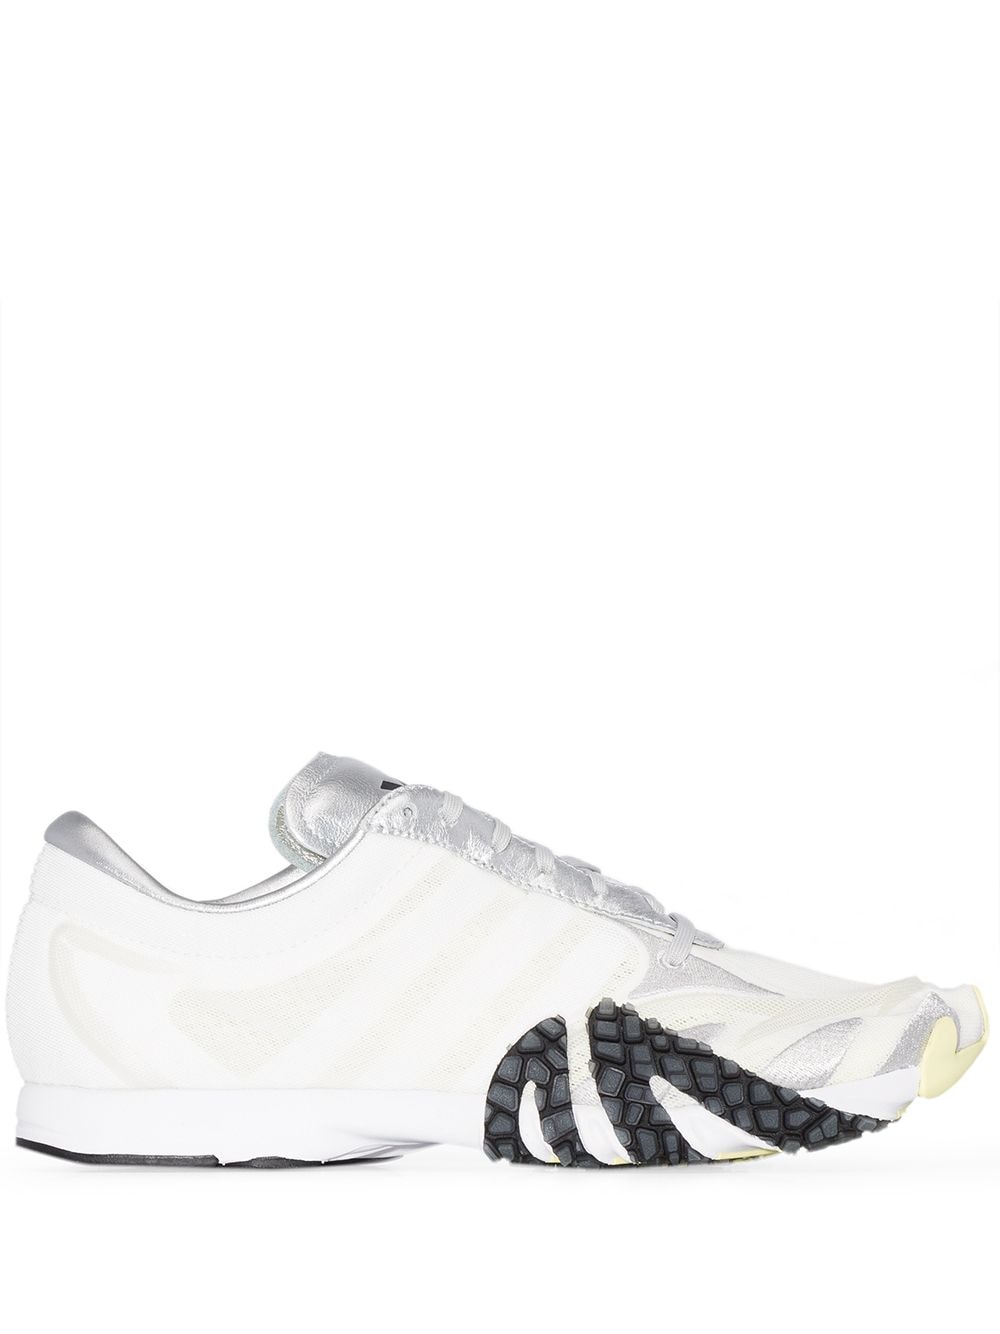 Y-3 REHITO PANELLED SNEAKERS